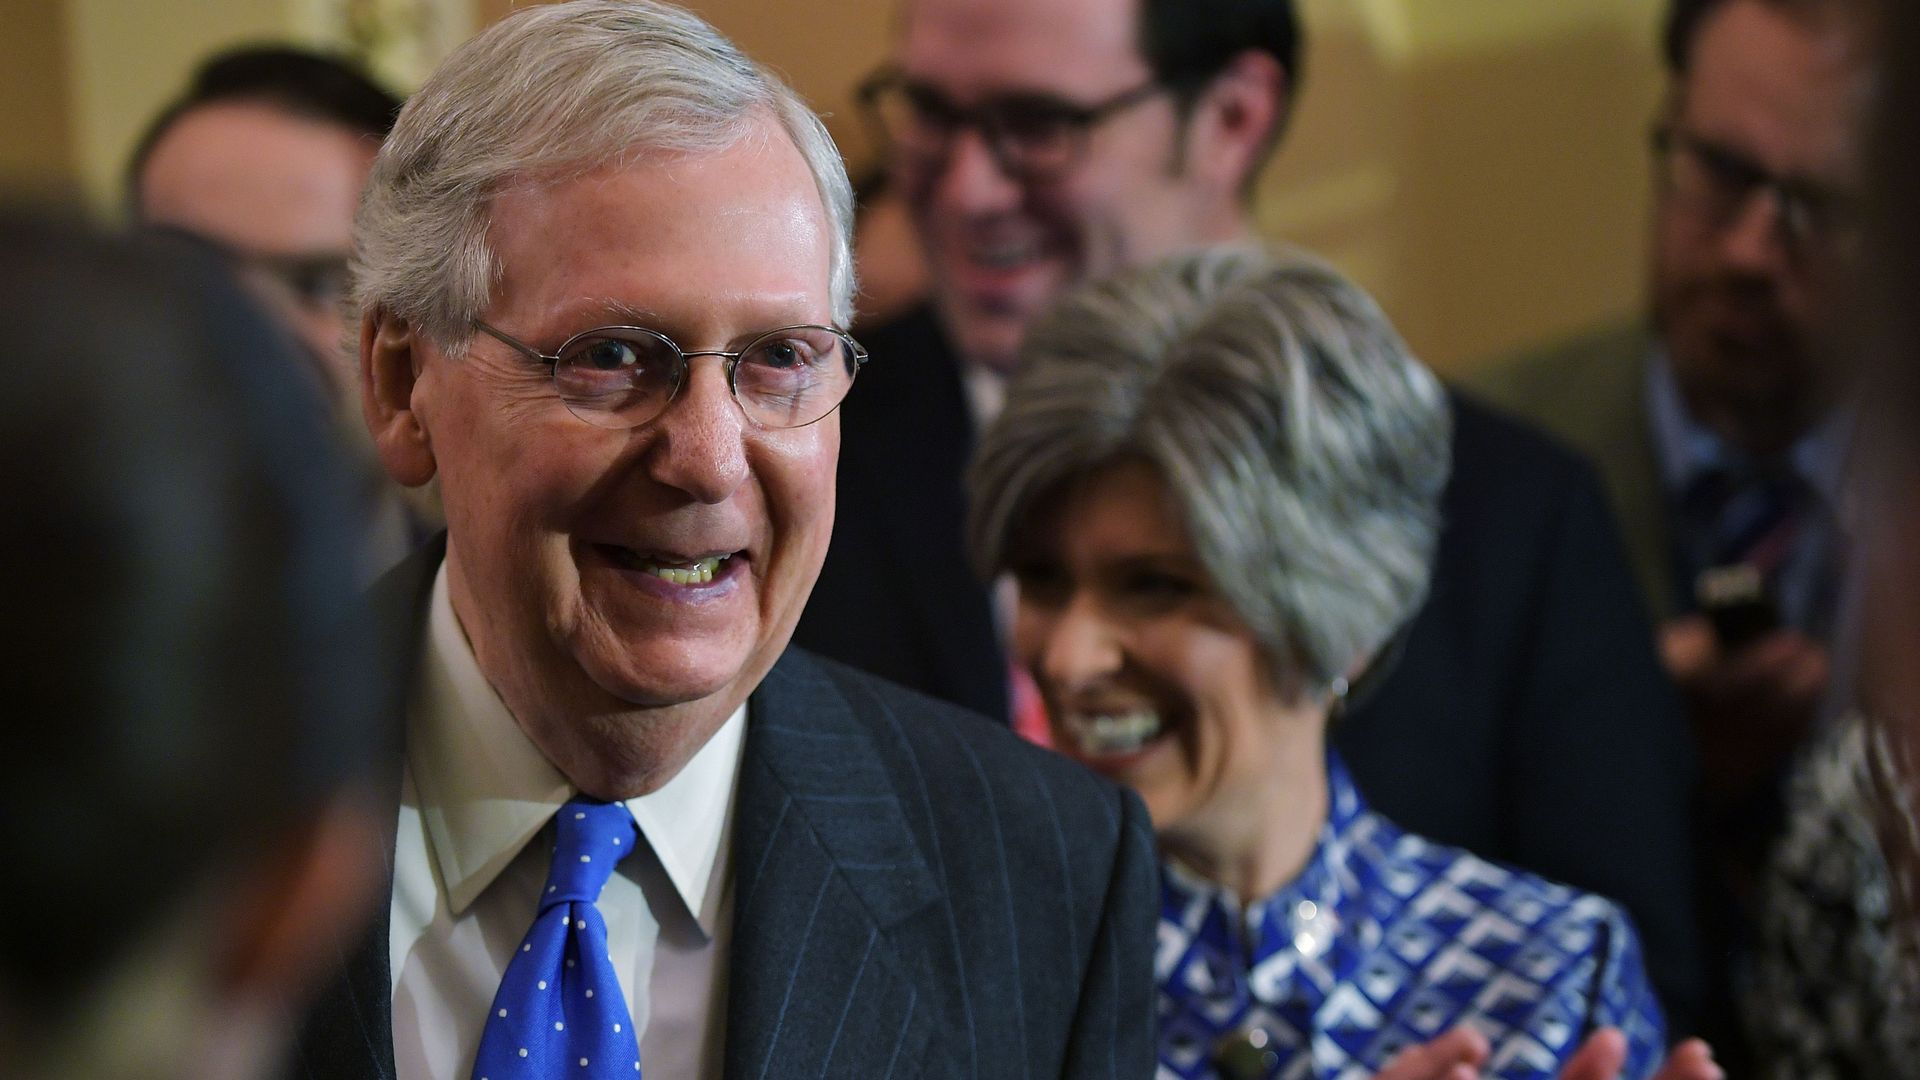 Mitch McConnell grins, surrounded by Republican senators